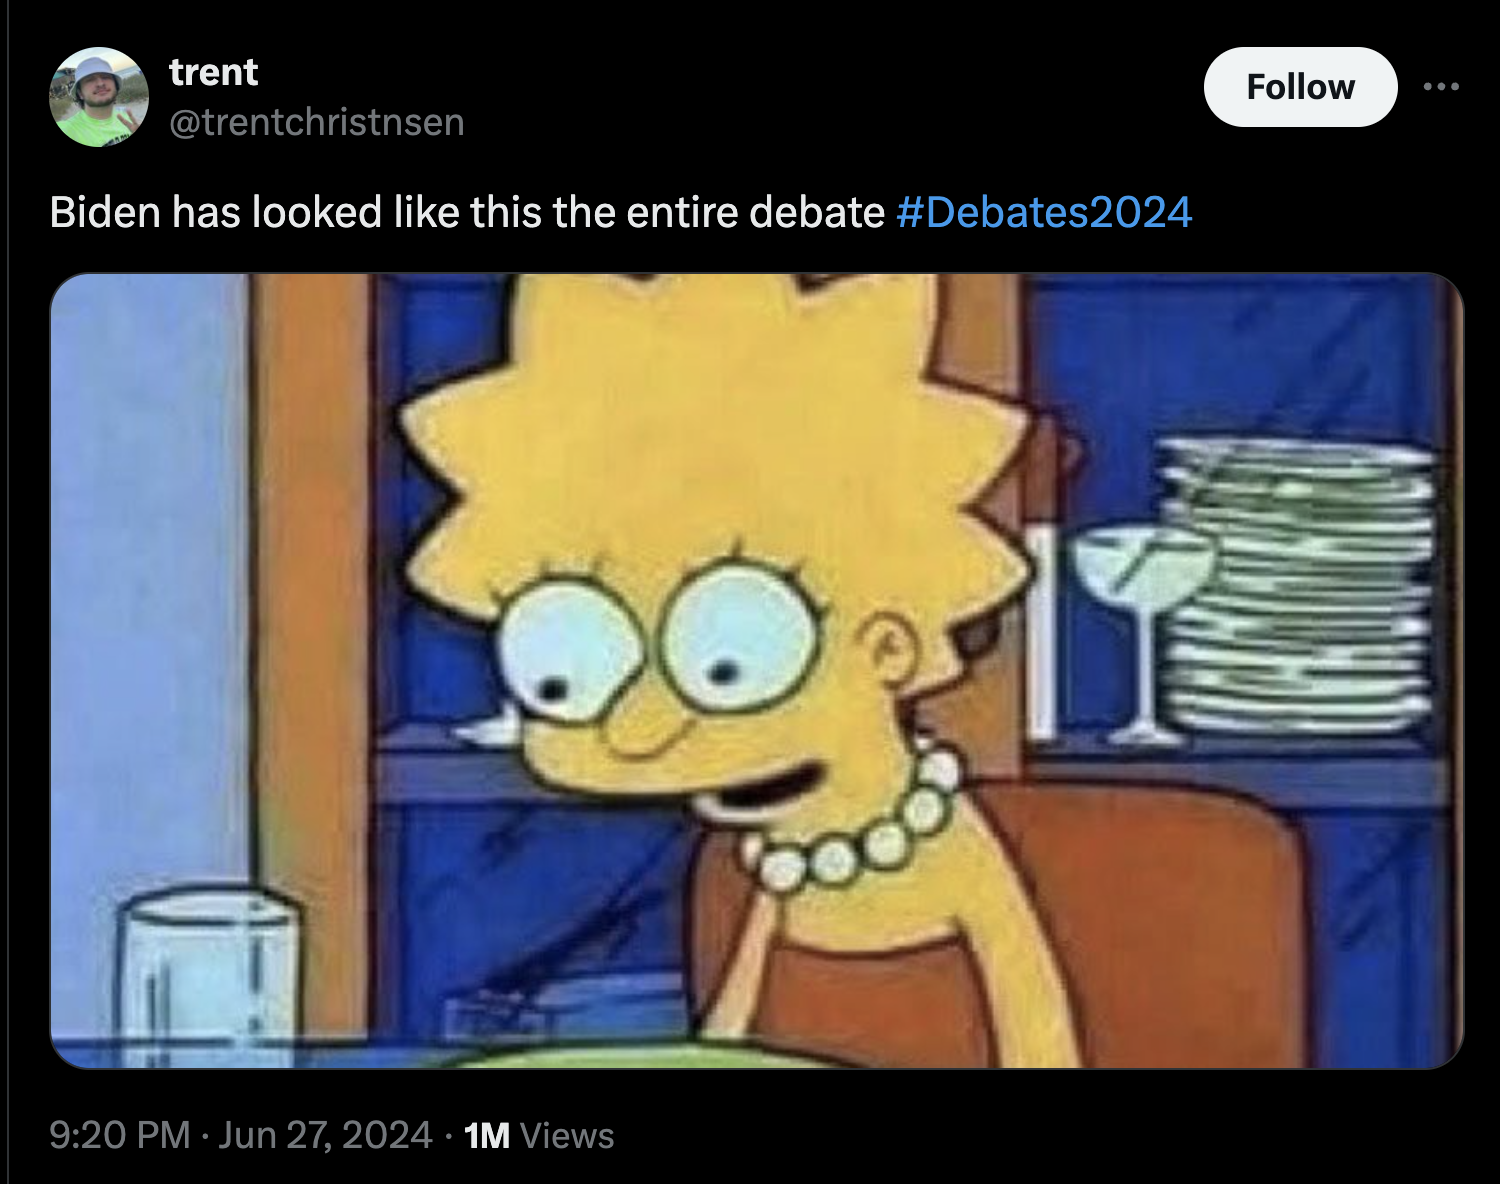 trent Biden has looked this the entire debate 1M Views